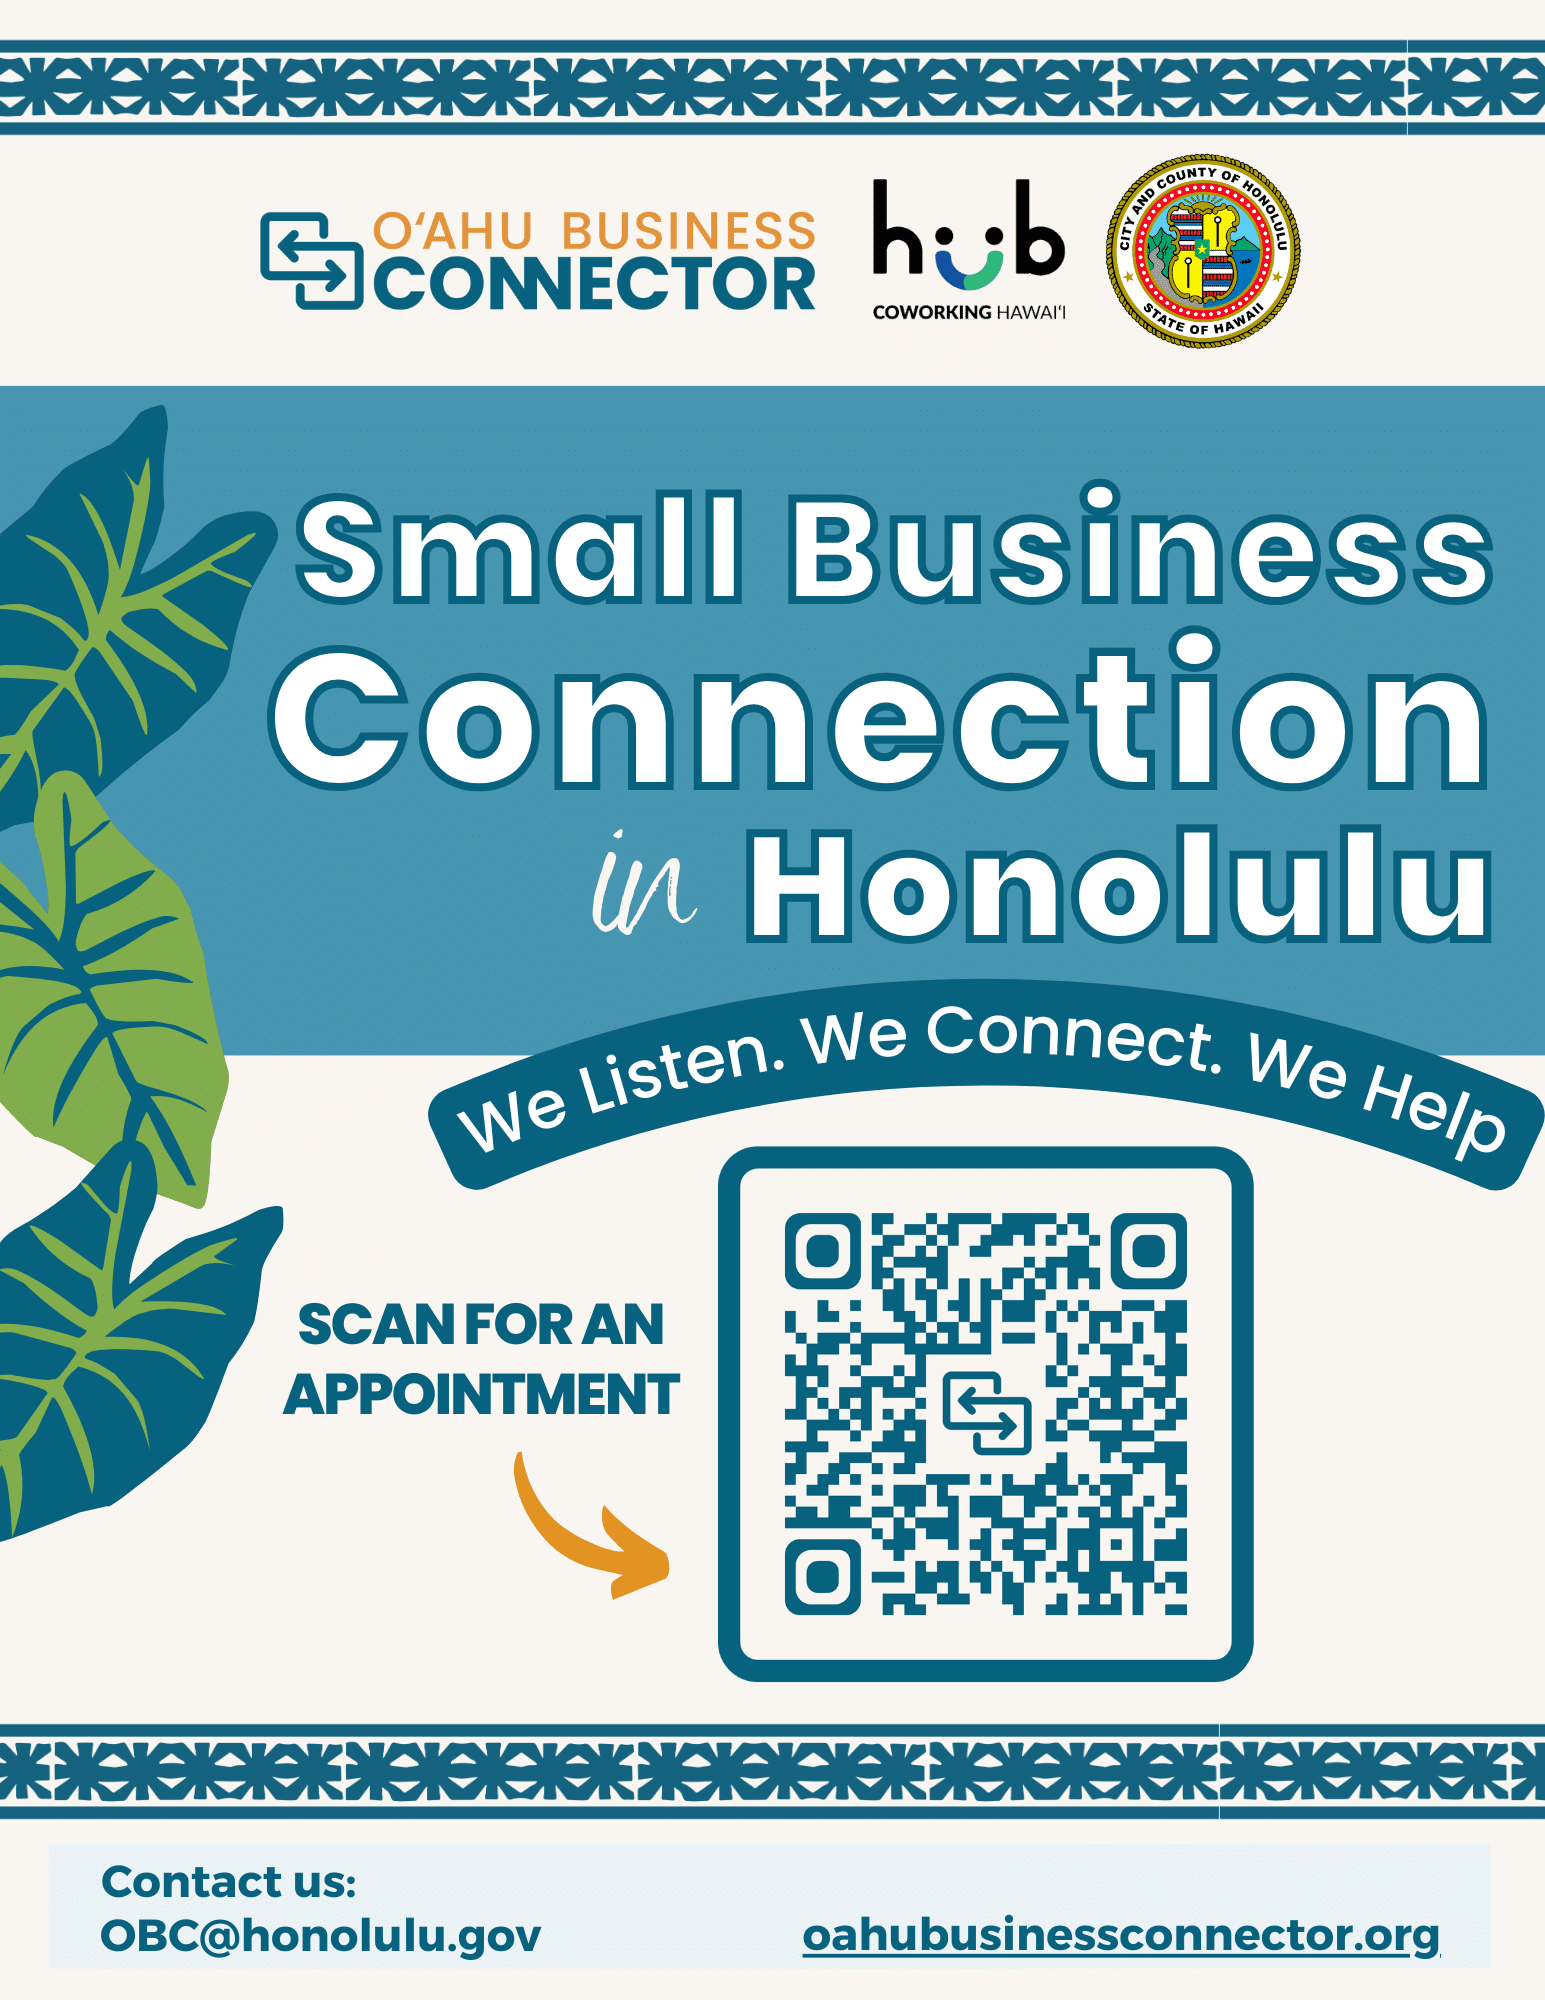 Small Business Connection in Honolulu